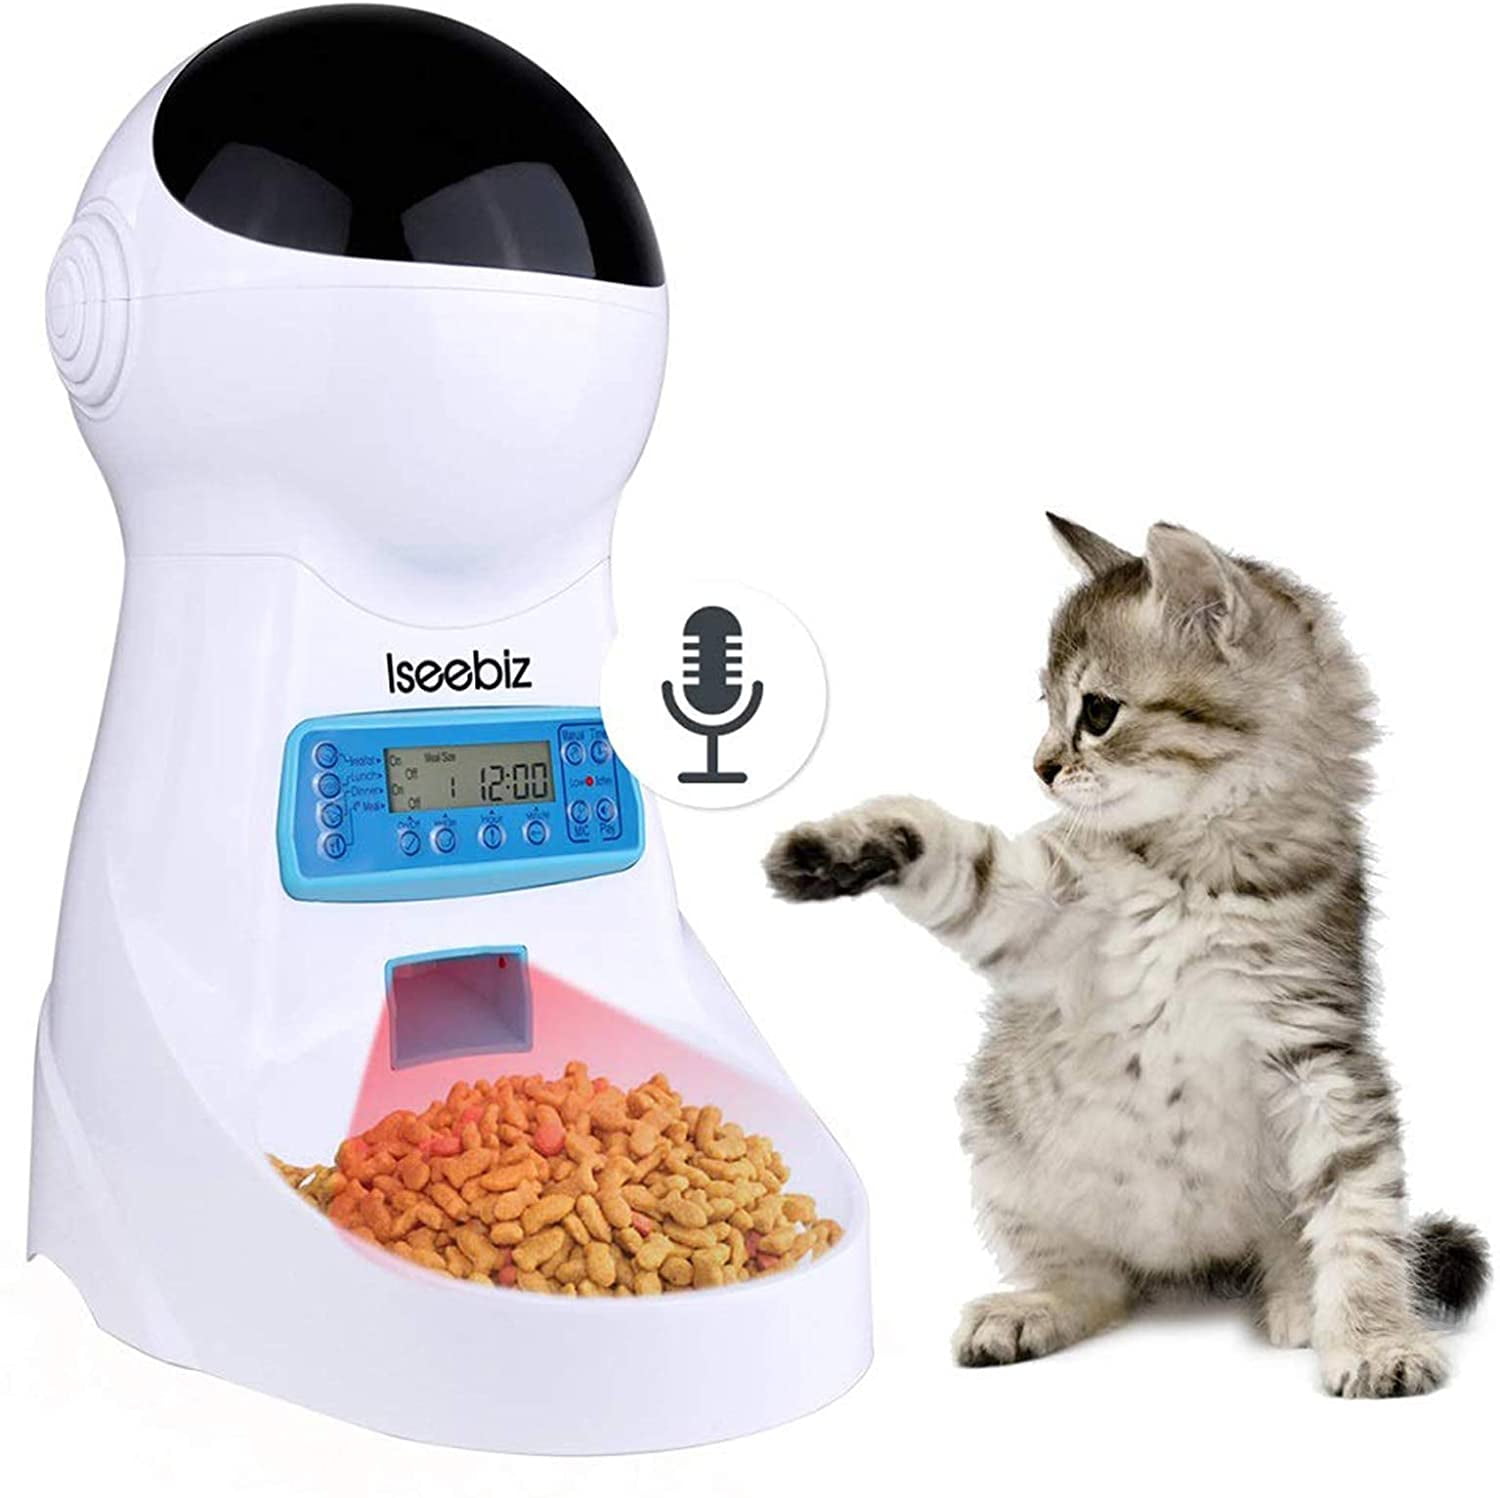 6Meal Automatic Pet Feeder Food Dispenser for Cats and Dogs,Pink